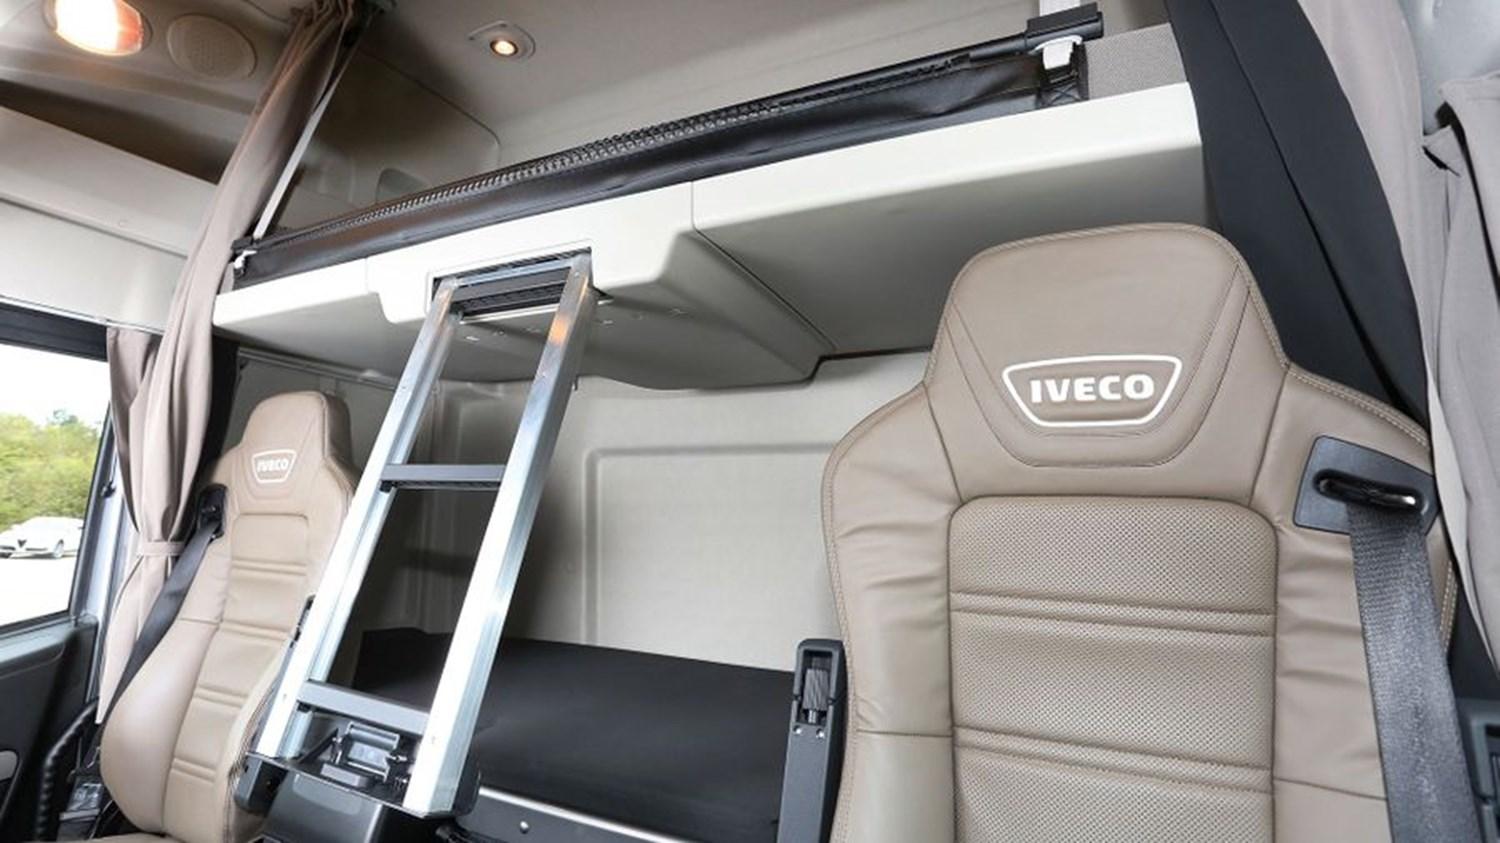 IVECO Stralis seats and bed